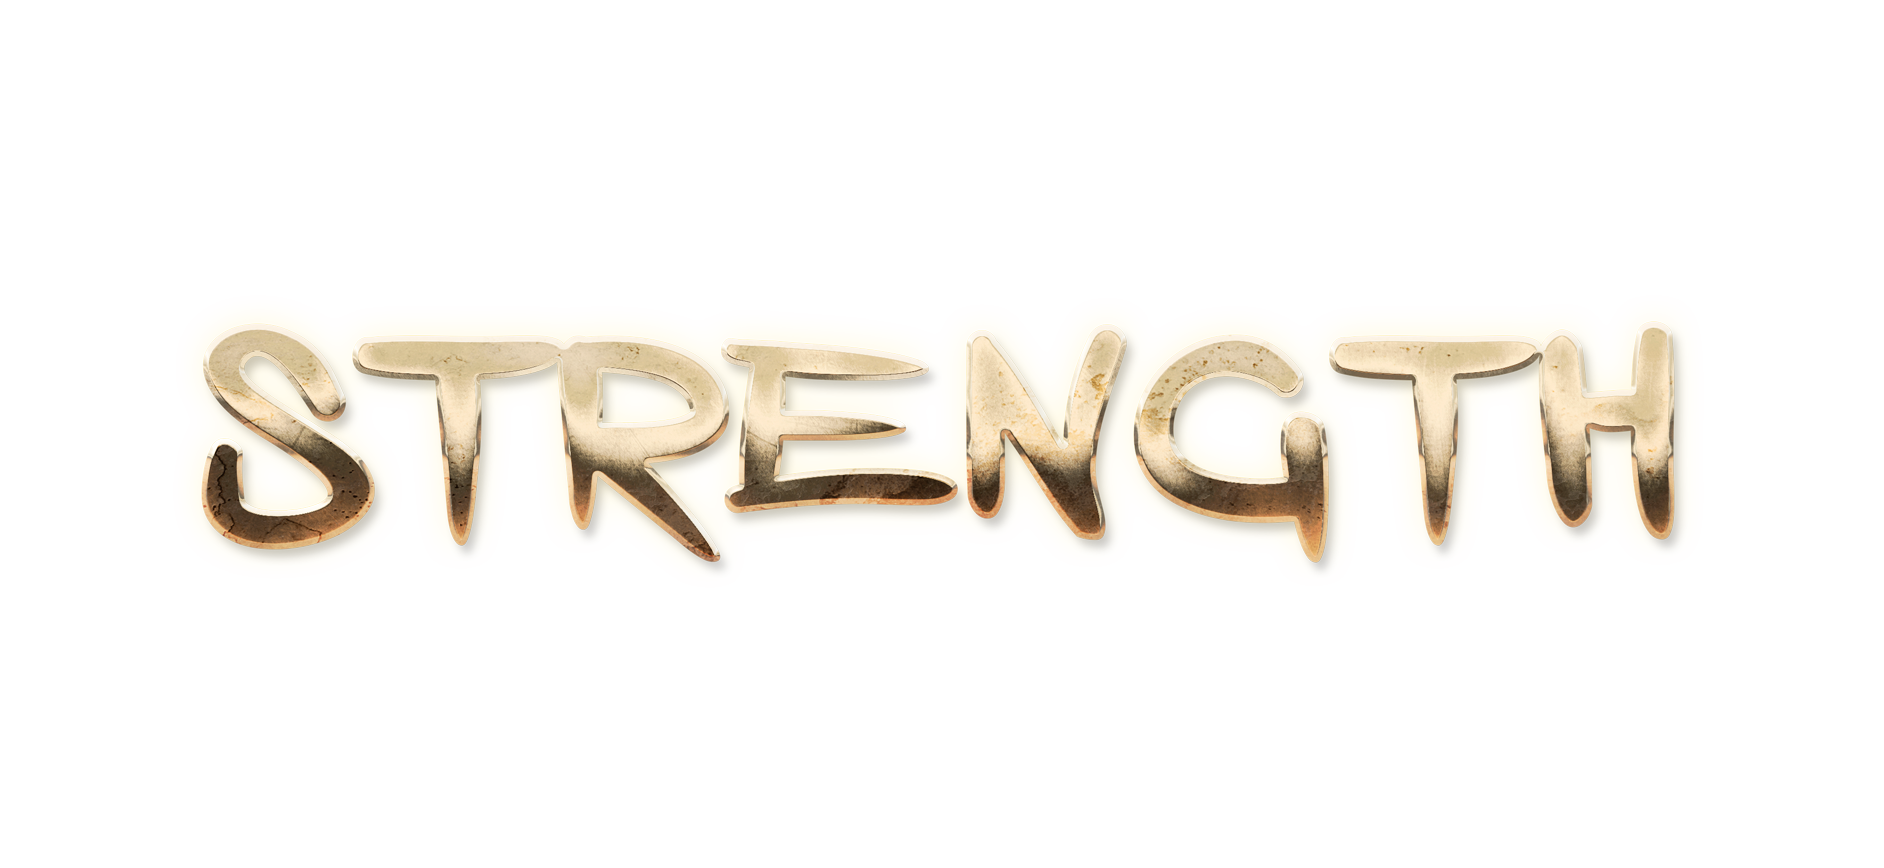 WORD STRENGTH gold text effects art typography PNG images free